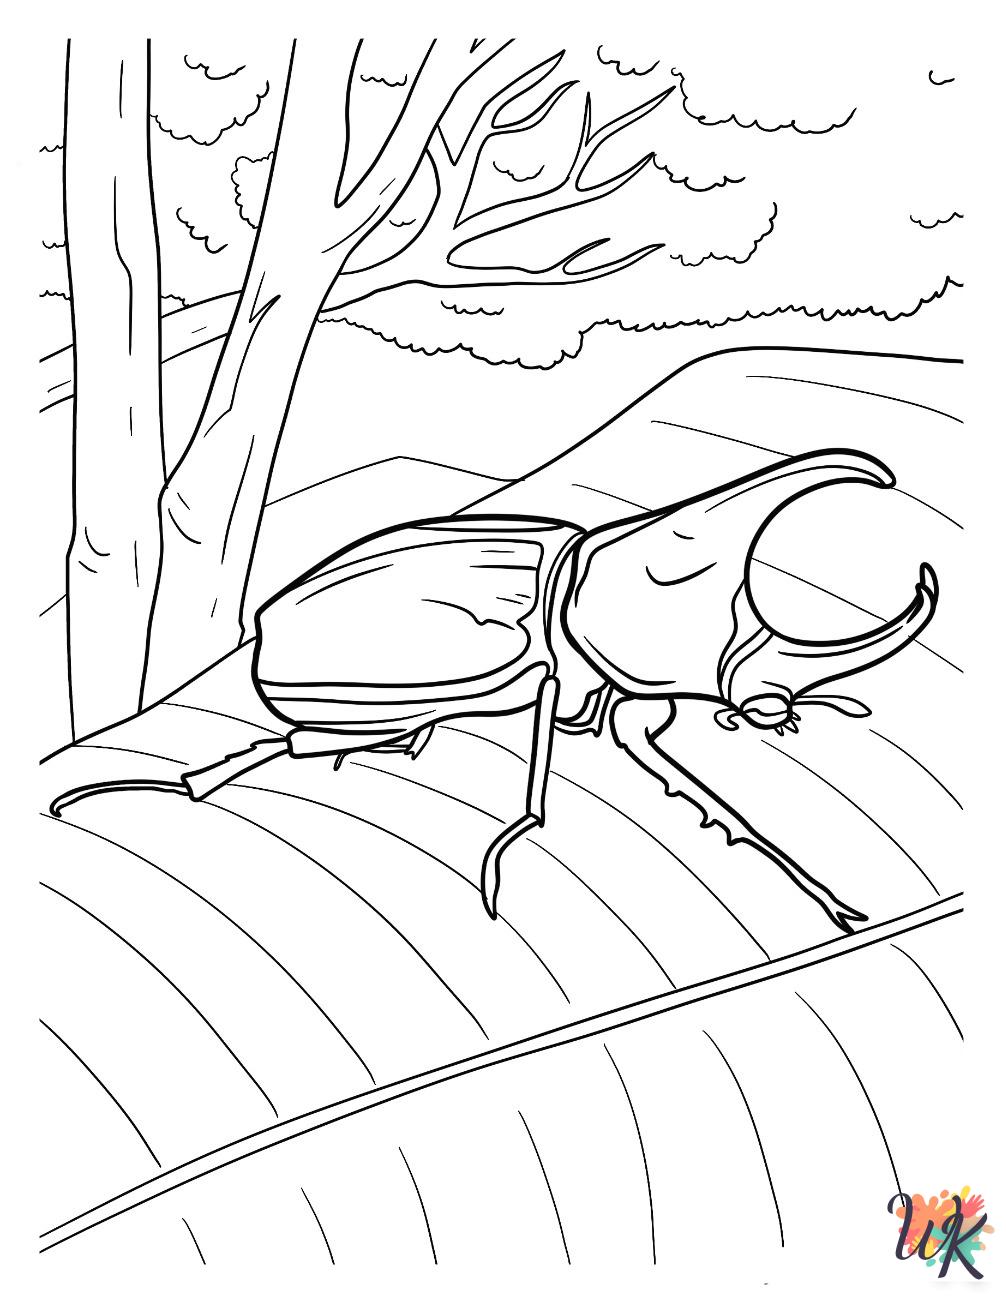 Beetle ornaments coloring pages